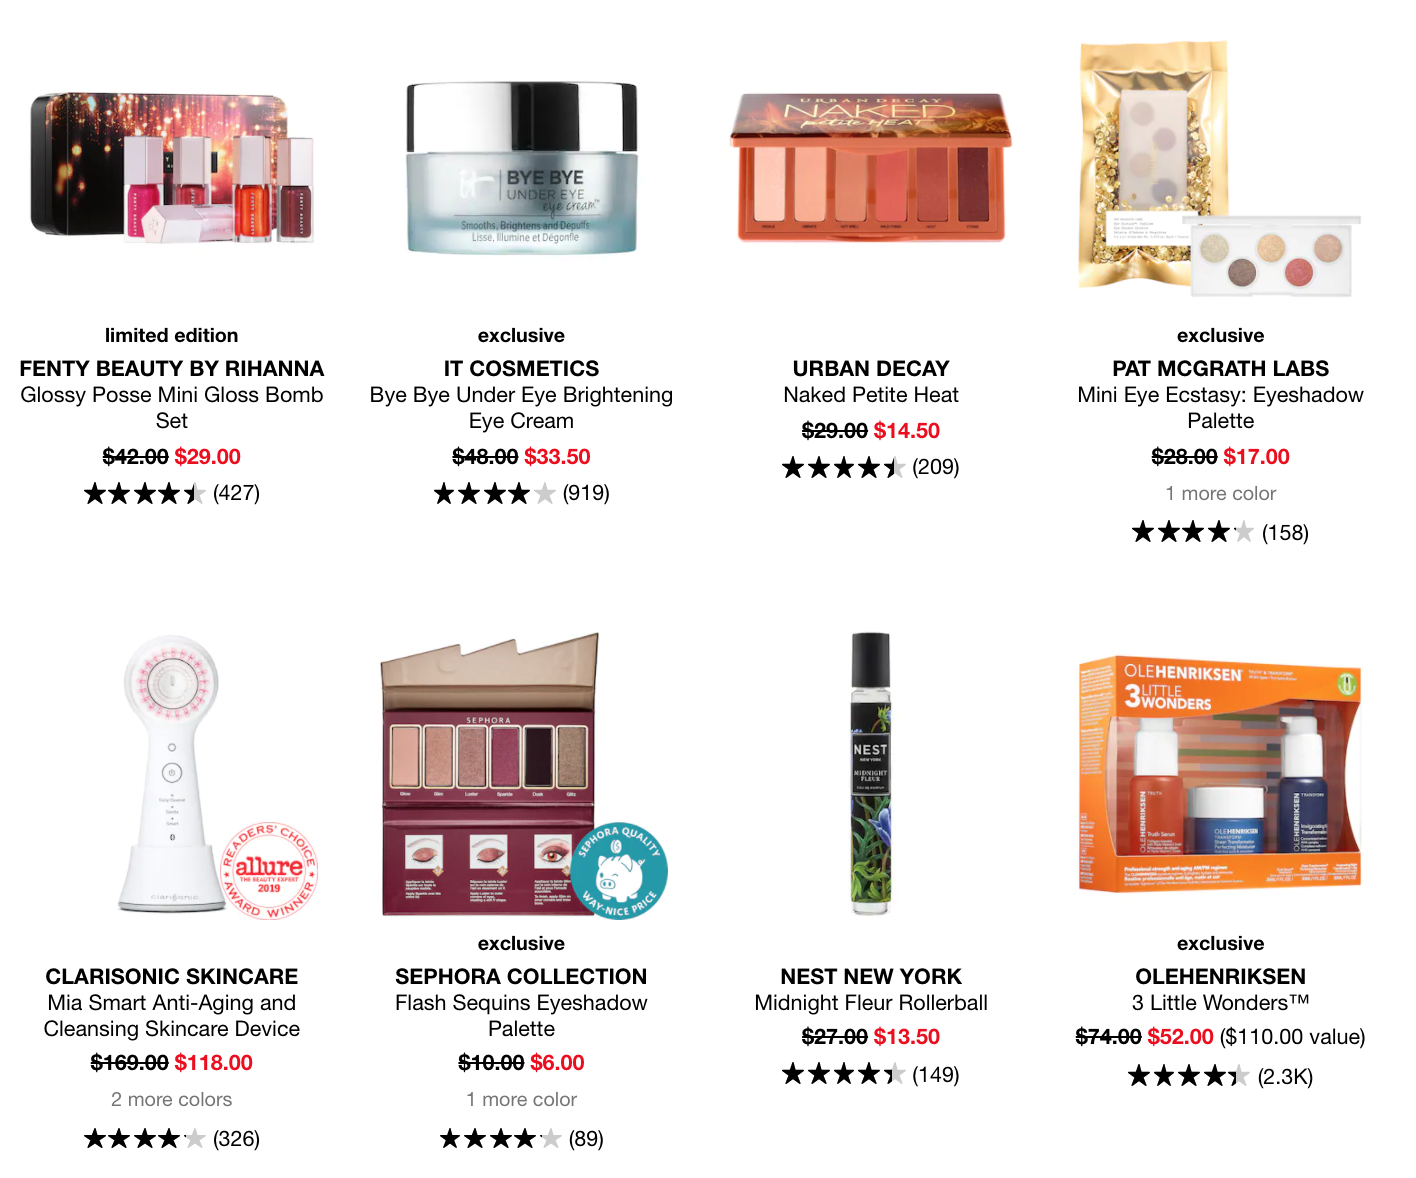 Sephora Memorial Day Sale Up To 50 Off! MSA